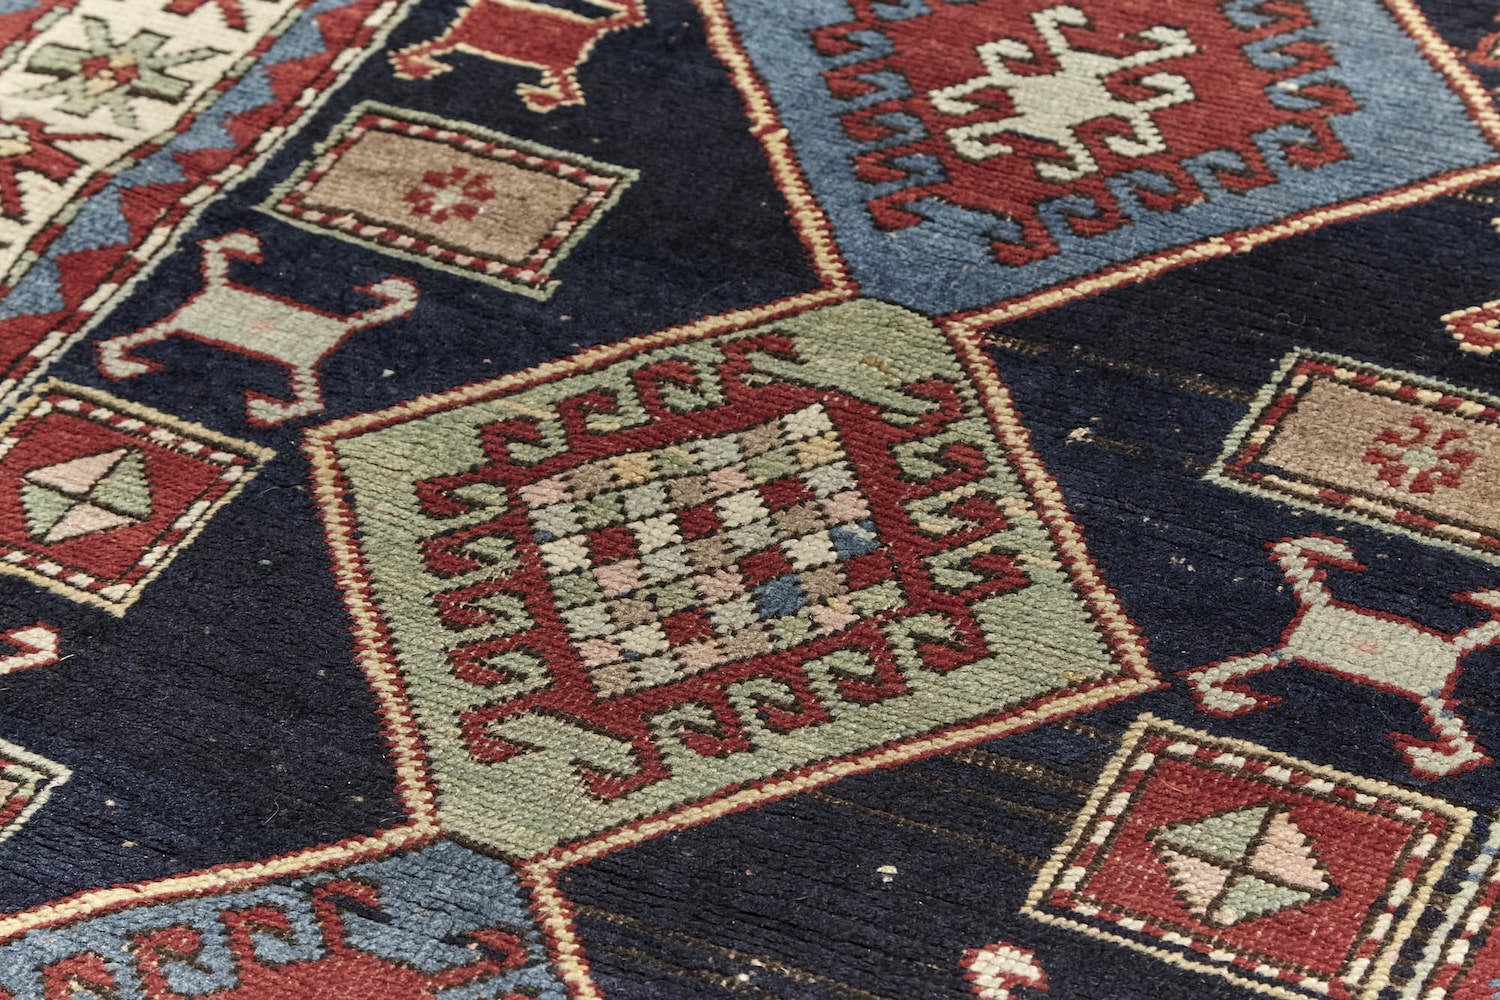 Detail of Antique hand woven Kazak Persian rug with dark blue base, blue and pale green diamonds across center with a cream and red border, featuring red, pale green and blue star-like shapes. Perfect for bedroom, living room dining room or kitchen. Available from King Kennedy Rugs Los Angeles.